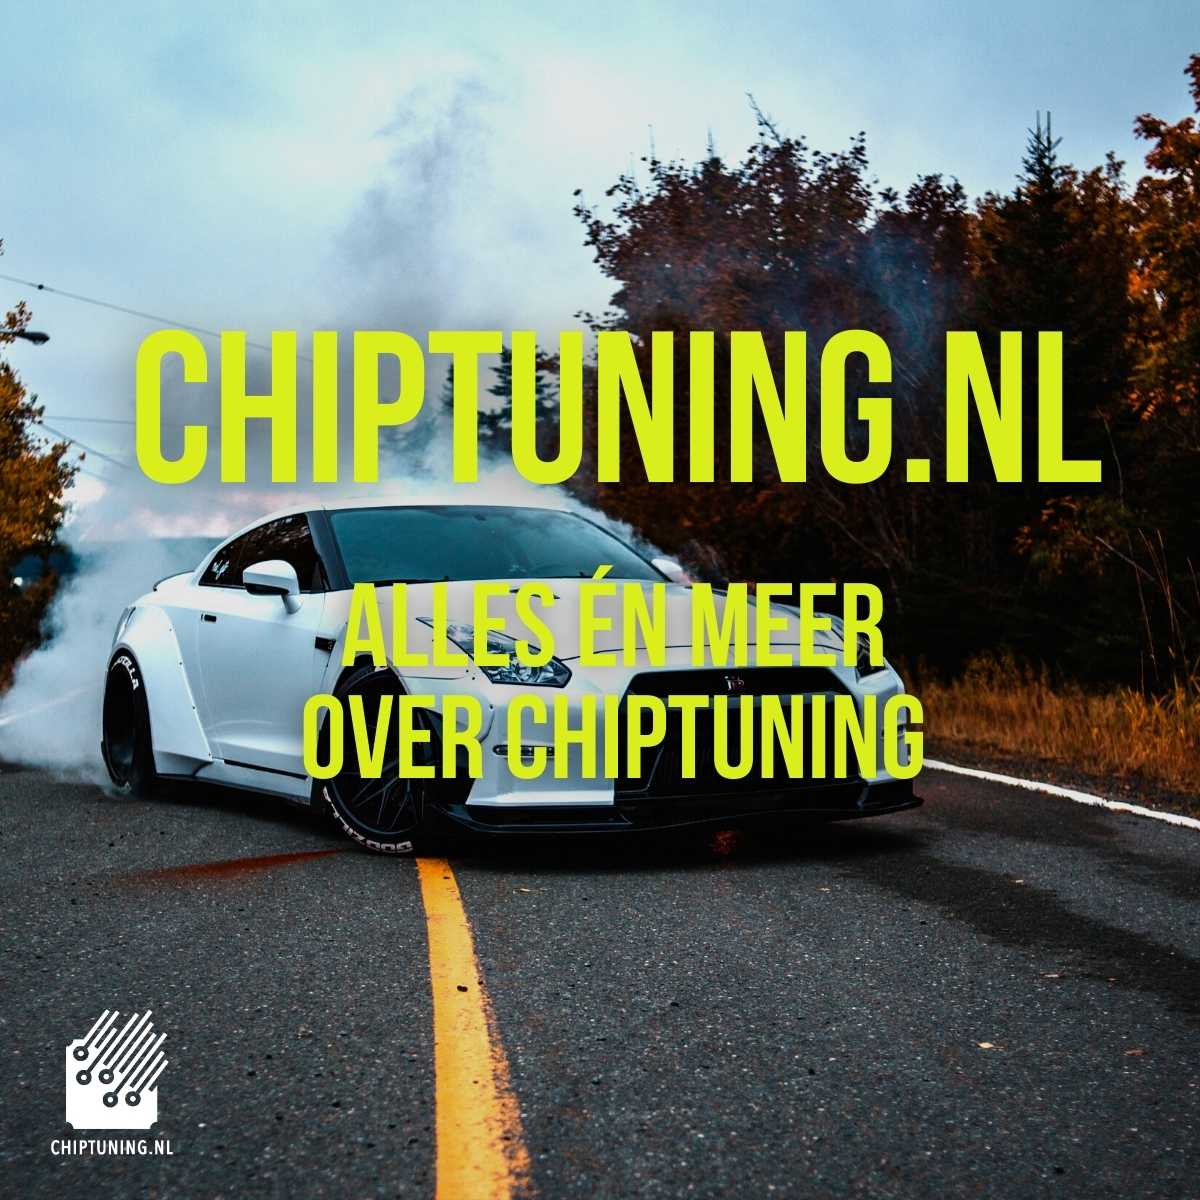 promo post yellow text overlay chiptuning.nl on a photo of a white drifting car on the road